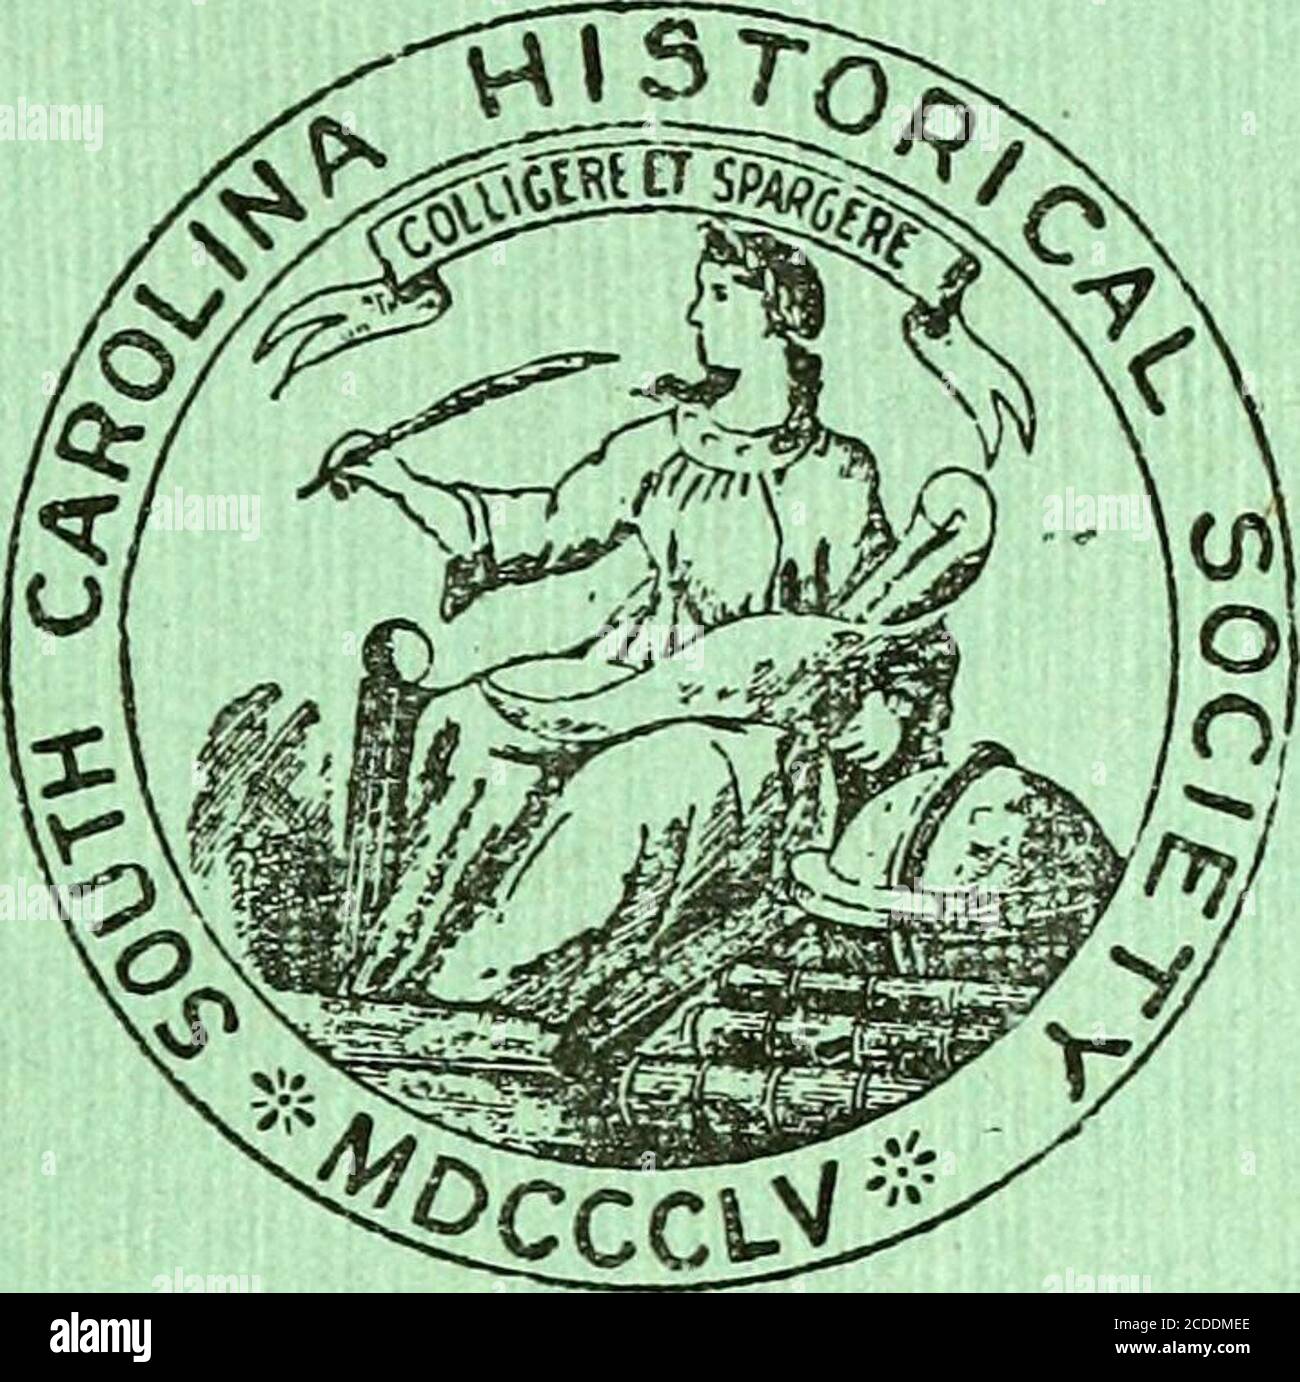 . The South Carolina historical and genealogical magazine . un. this 24th March 1746/7before me Tho Monck. LIST OF PUBLICATIONS OF THE SOUTH CAROLINA HISTORICAL SOCIETY, COLLECTIONS. Vol. L, 1857, $3.00; Vol IL, 1858, $3.00; Vol. III.,1859, out of print. Vol IV., 1887, unbound, $3.00, bound,$4.00; Vol. v., 1897, paper, $3.00. PAMPHLETS. Journal of a Voyage to Charlestown in So. Caro-lina by Pelatiah Webster in 1765. Edited by Prof. T.P. Harrison, 1898. 75c. The History of the Santee Canal. By Prof. F. A.Porcher. With an Appendix by A. S. Salley, Jr., 1903. 75c. THE SOUTH CAROLINA HISTORICAL AN Stock Photo